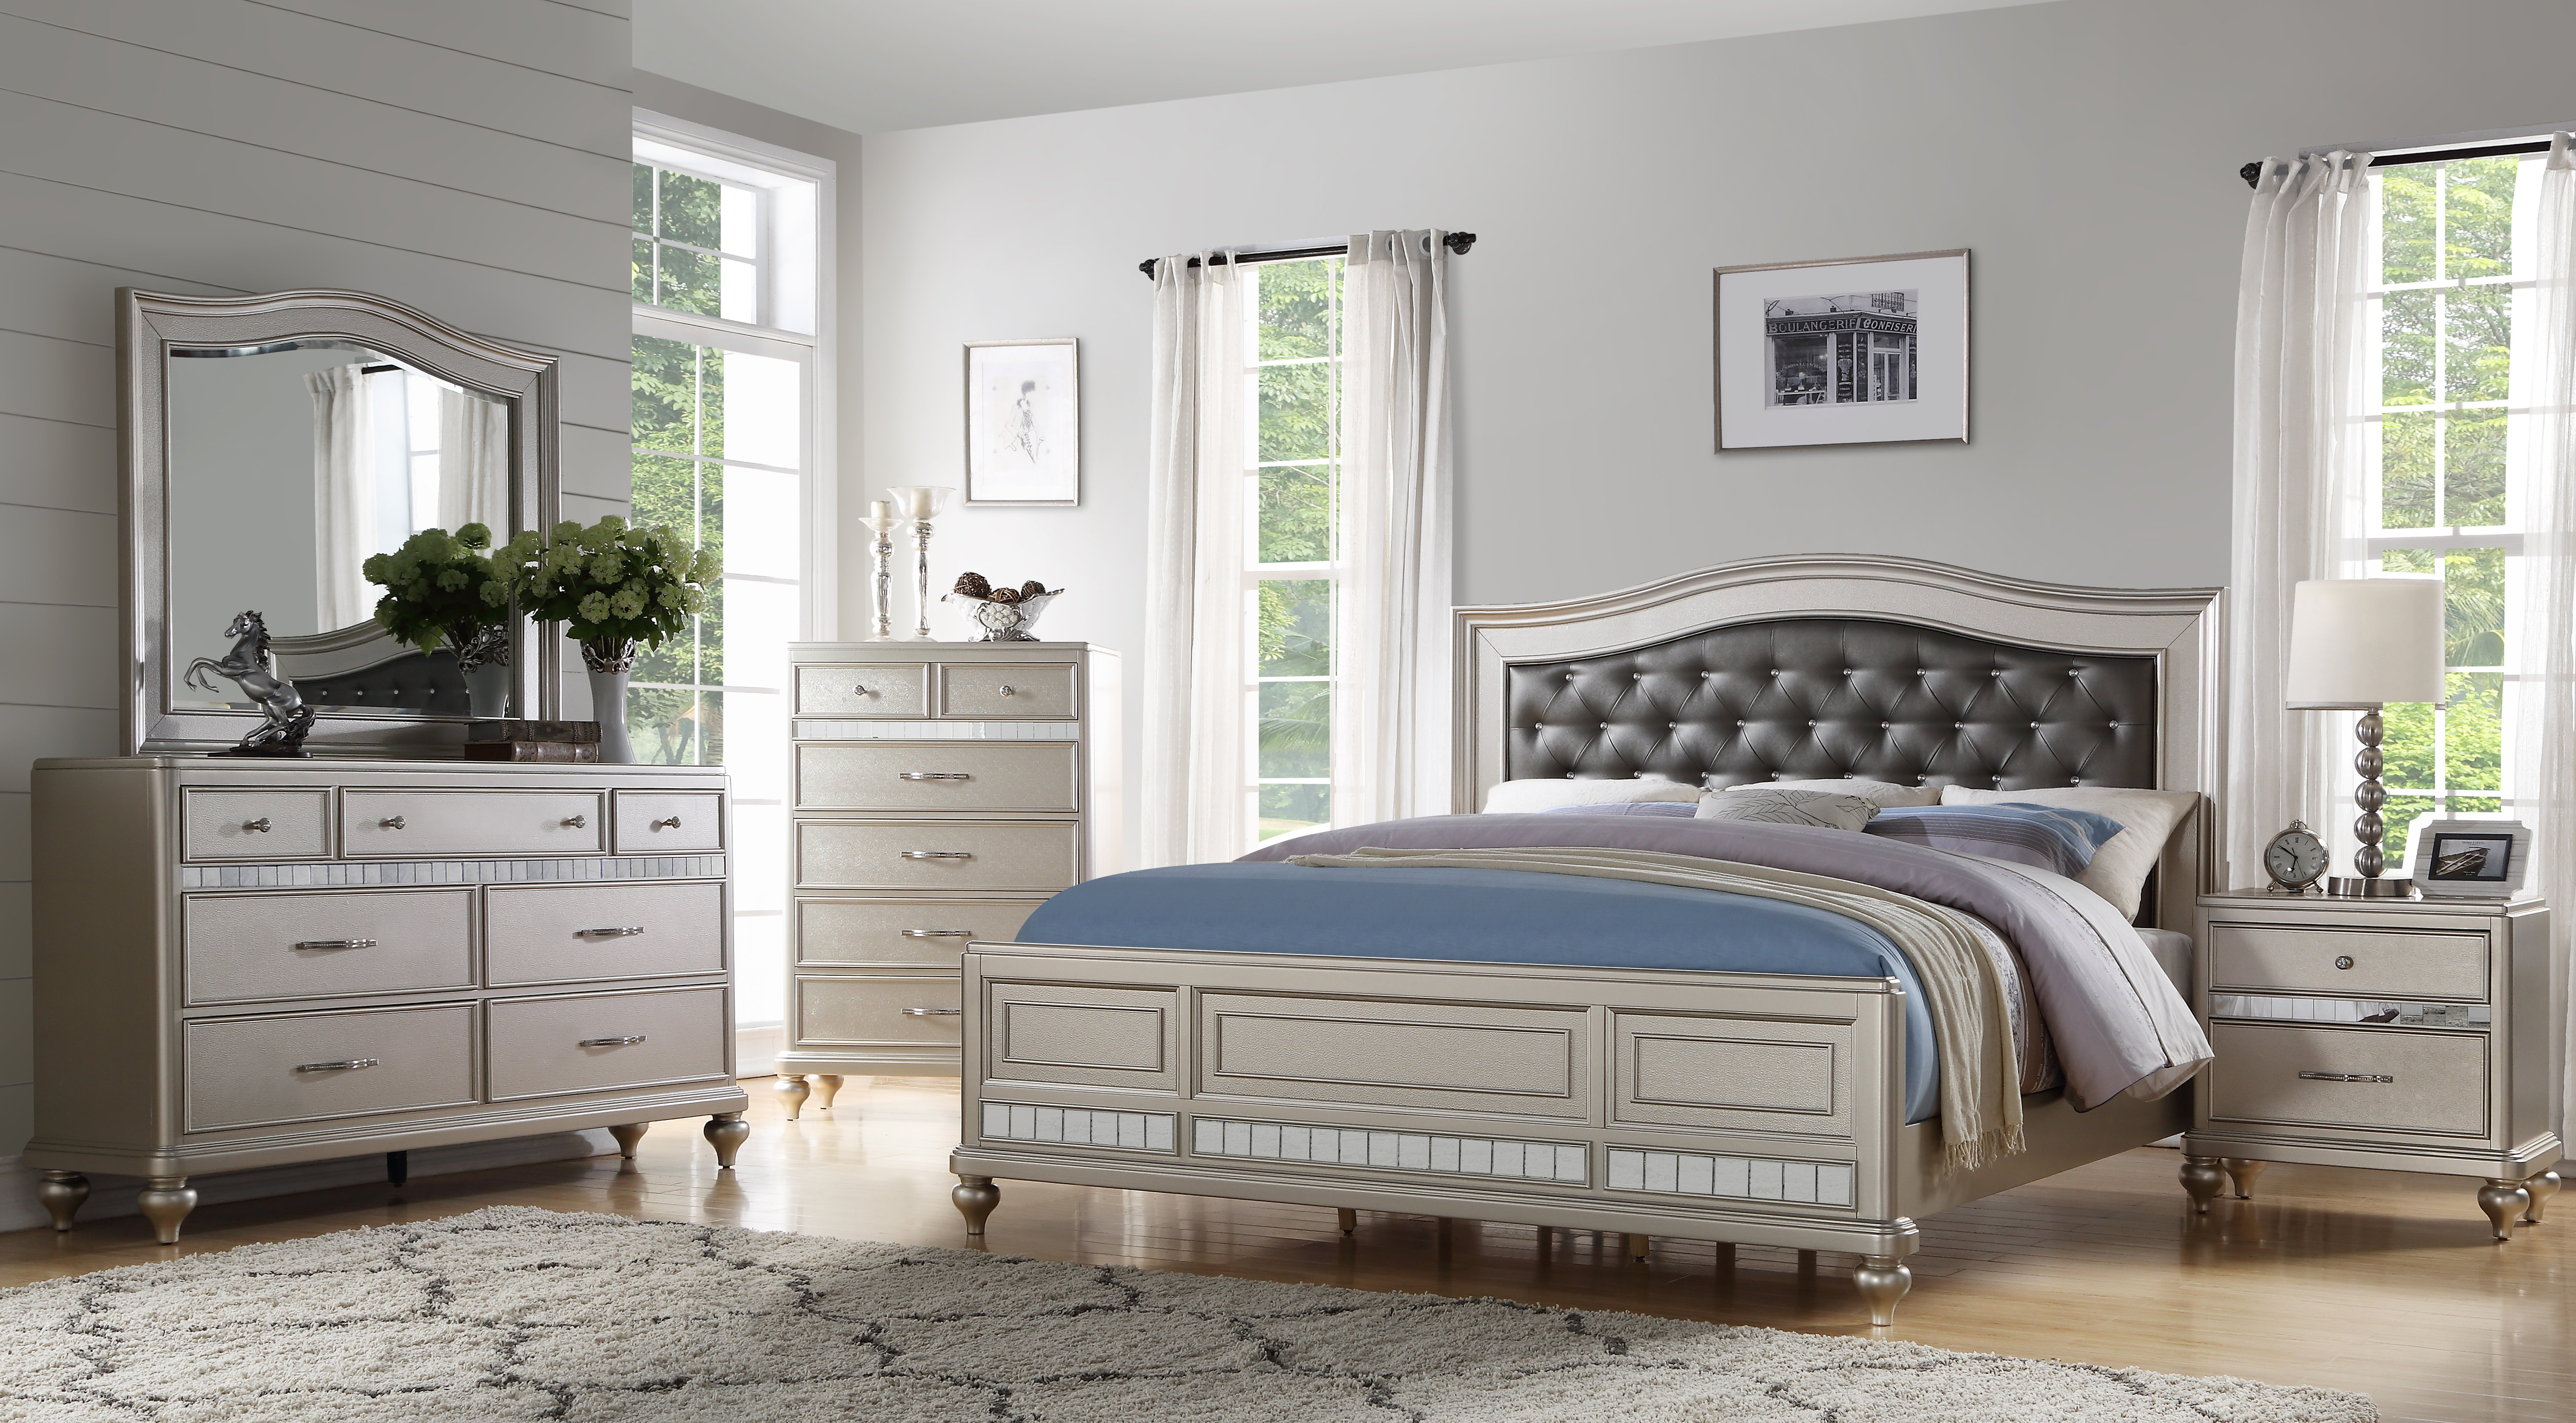 Keytesville 4 Piece Bedroom Set with regard to dimensions 5830 X 3220